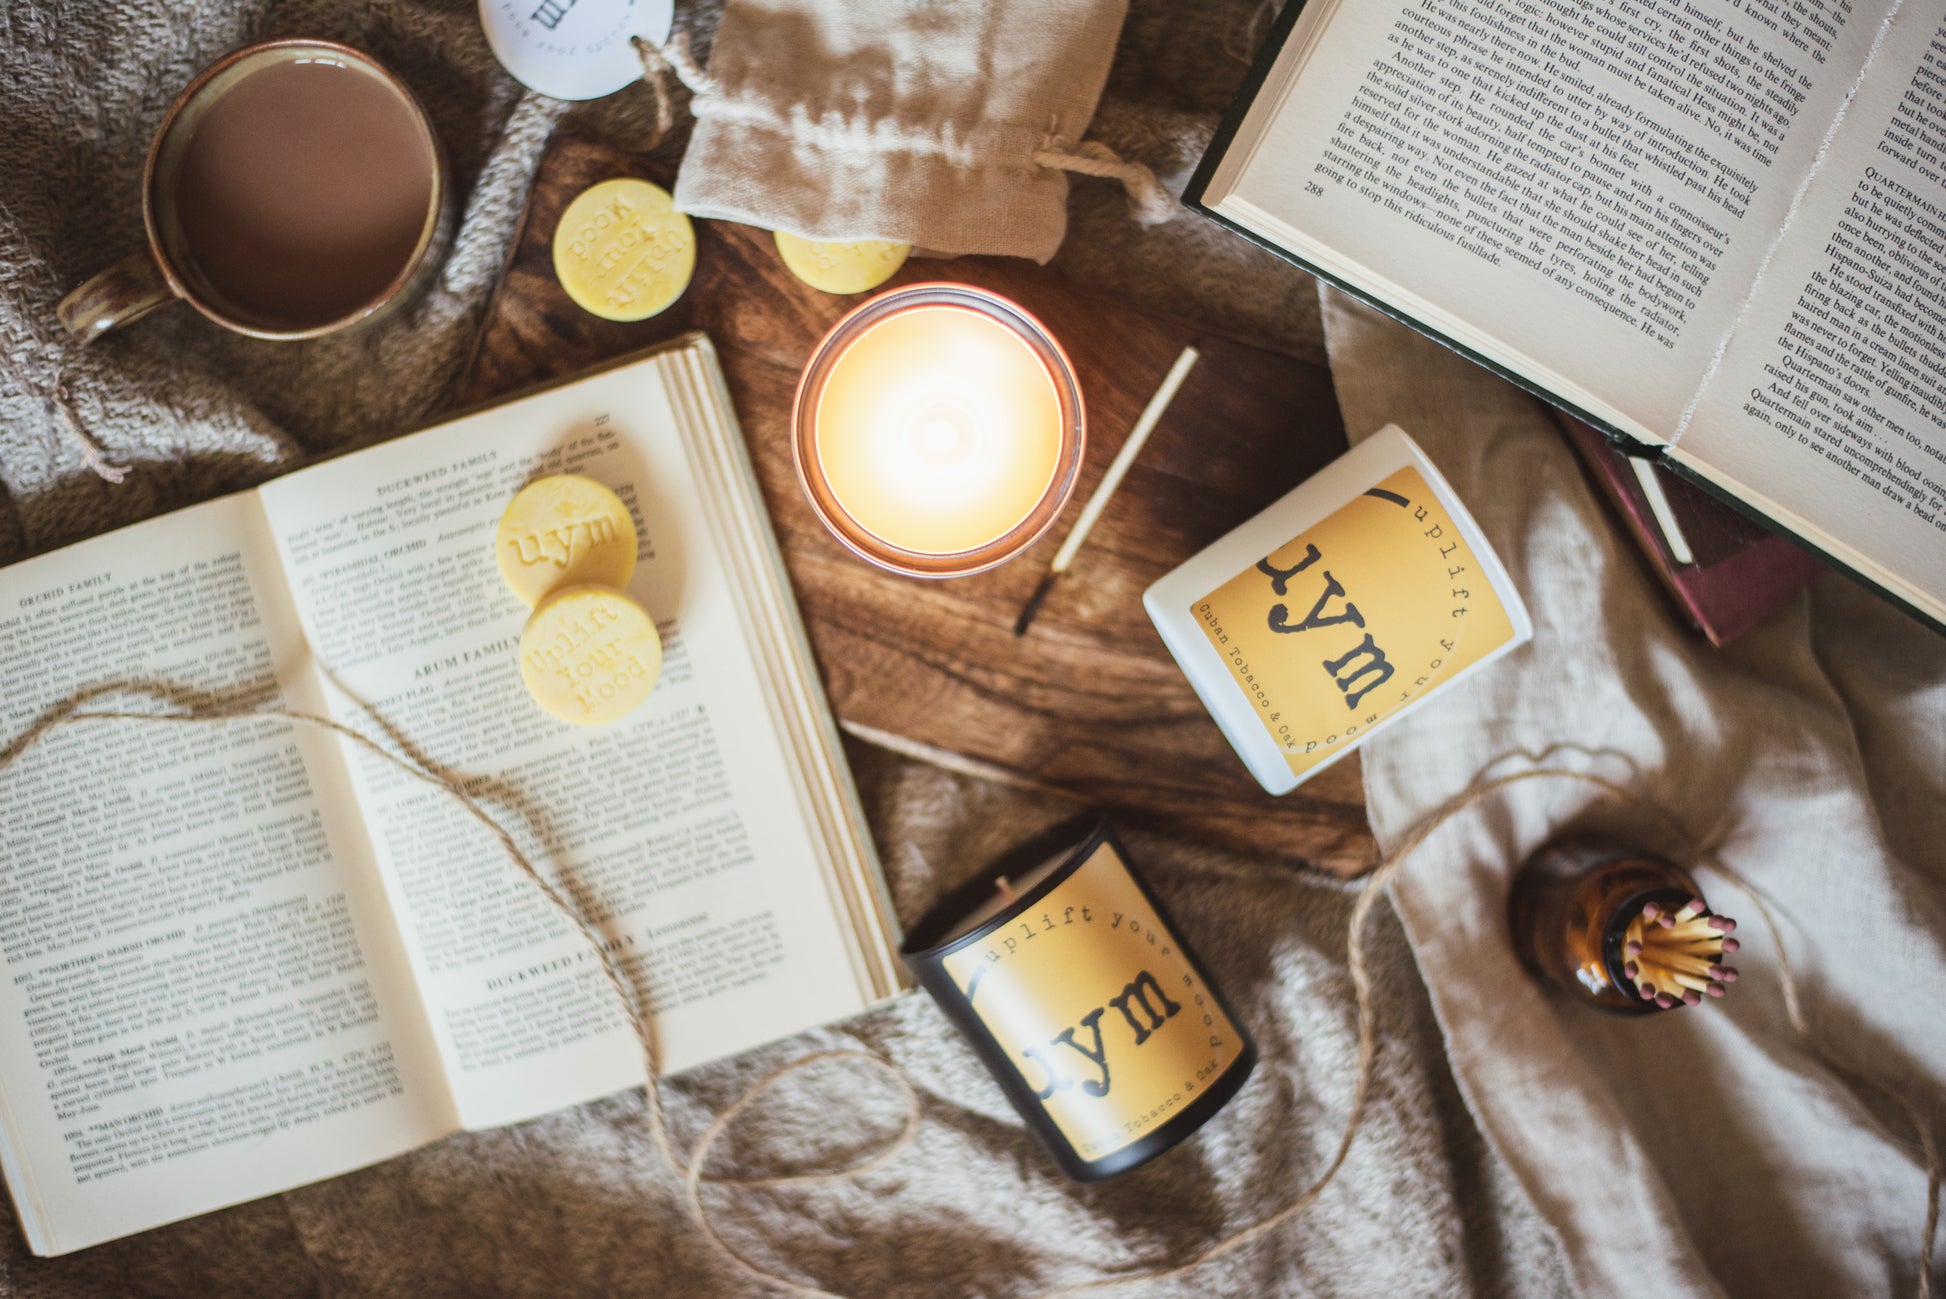 Cuban Tobacco & Oak Candle, highly scented natural wax candle and wax melts, lighted metallic tin candle, books.  cosy background, Uplift Your Mood Scents